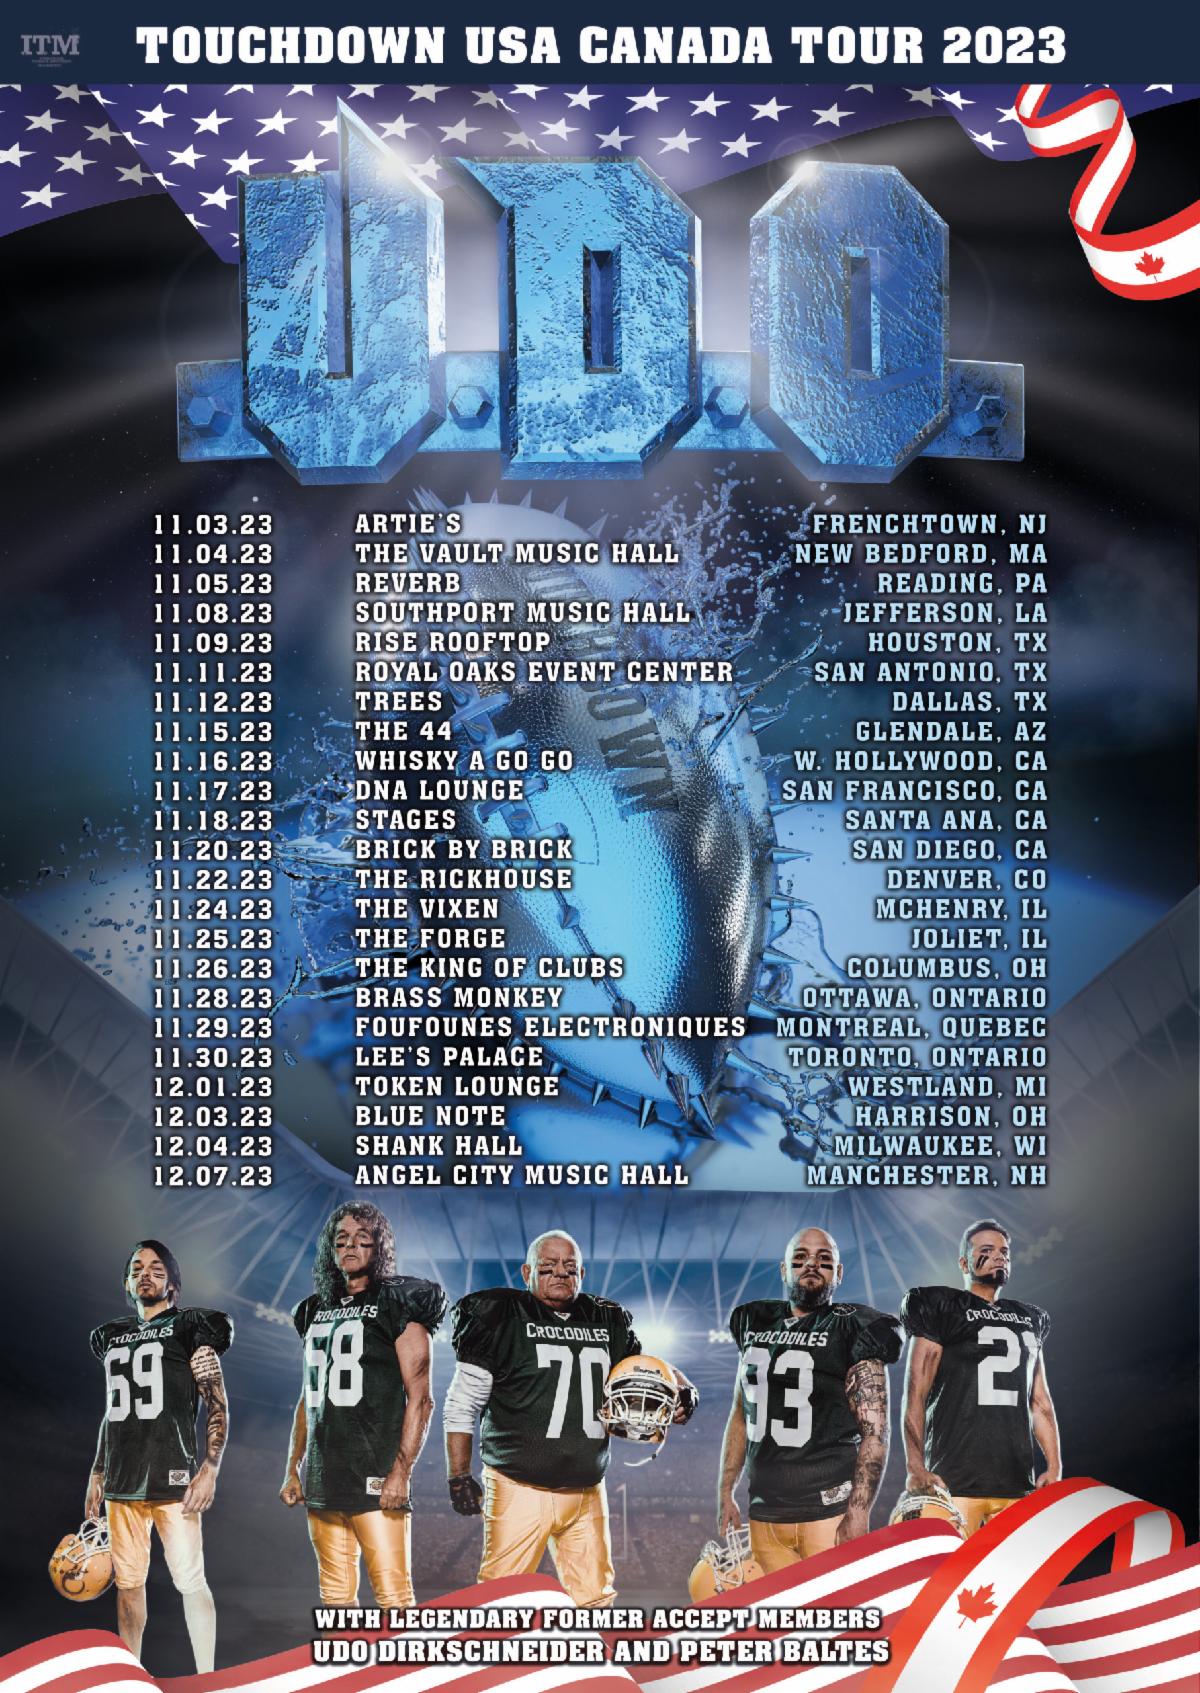 UDO North American tour dates for 2023